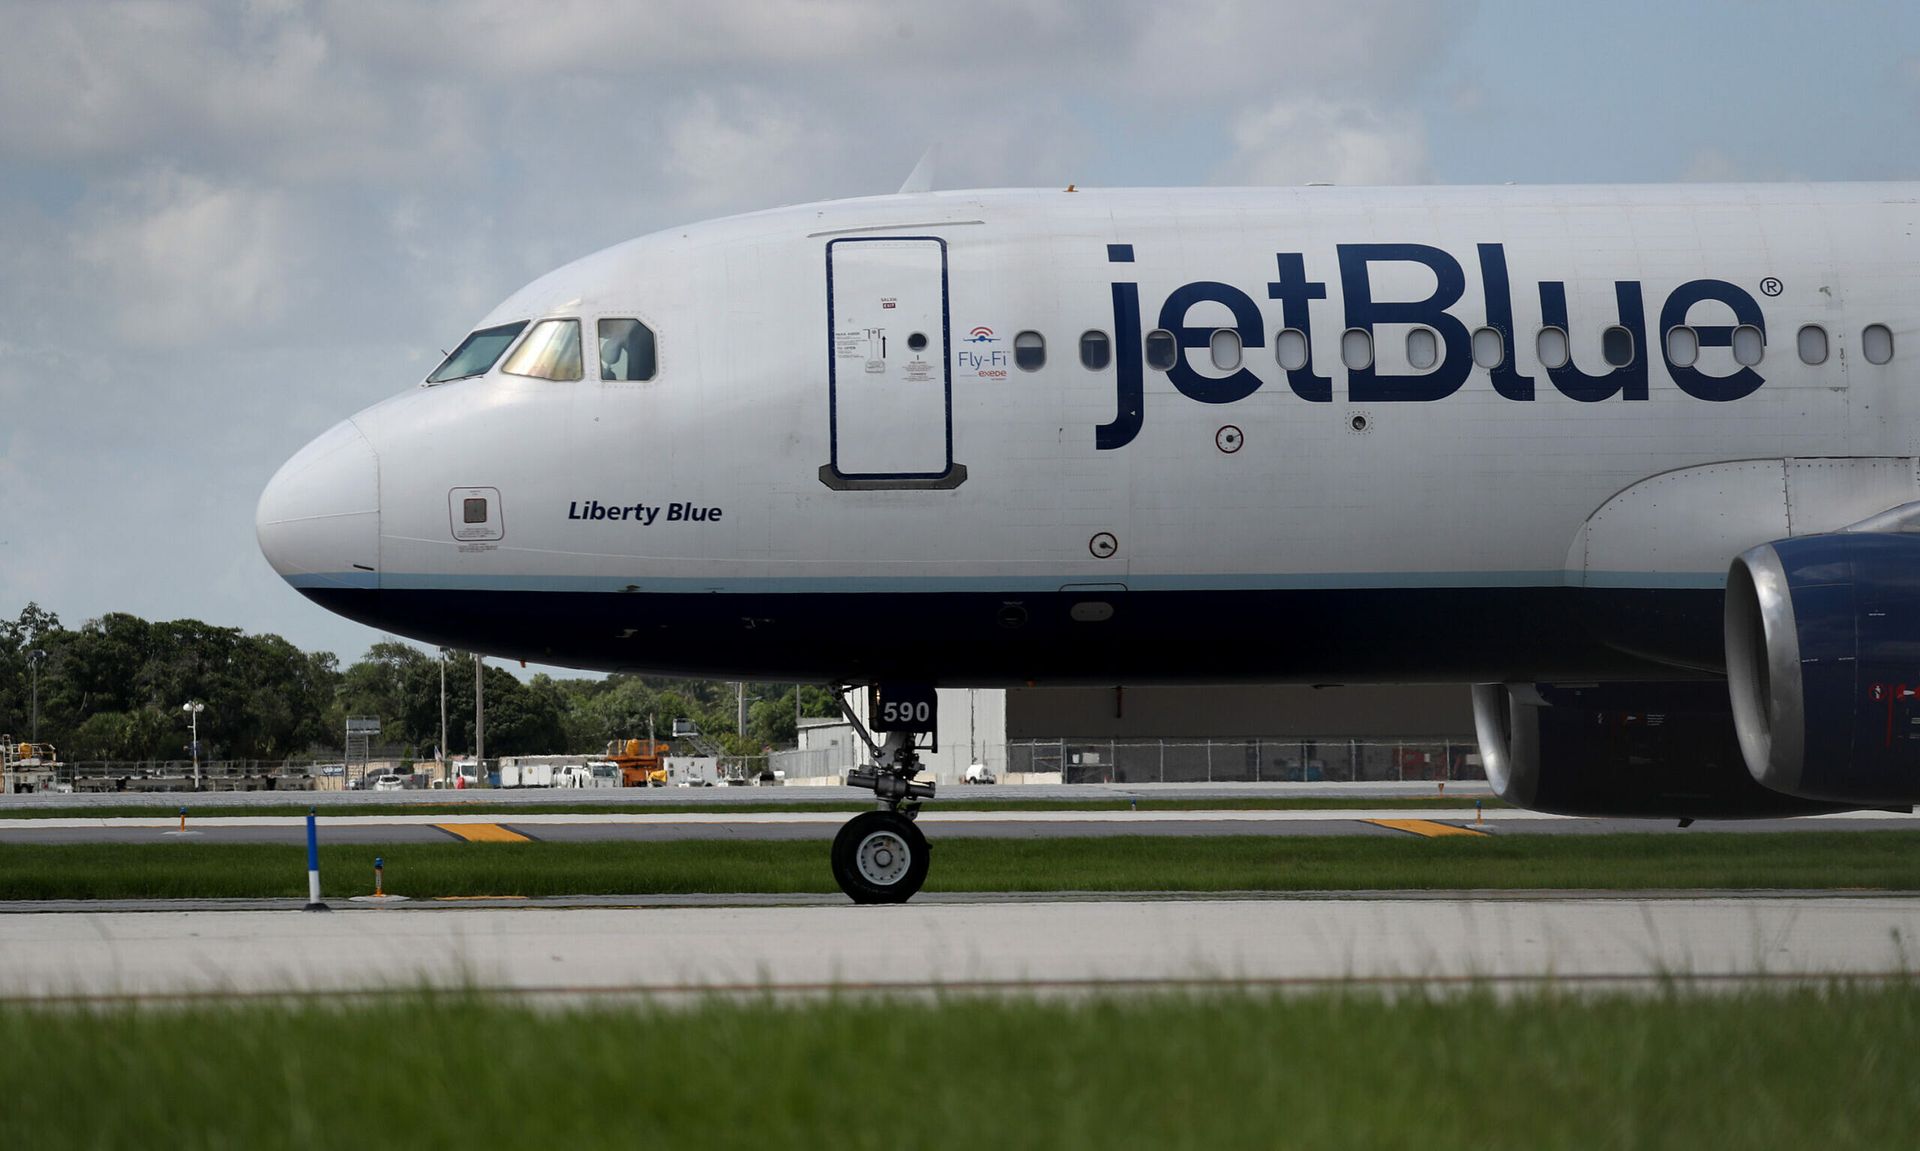 FORT LAUDERDALE, FLORIDA &#8211; JULY 16: A JetBlue plane prepares to take off from the Fort Lauderdale-Hollywood International Airport on July 16, 2020 in Fort Lauderdale, Florida. JetBlue Airways and American Airlines Group announced they will be creating an alliance between the two companies. (Photo by Joe Raedle/Getty Images)